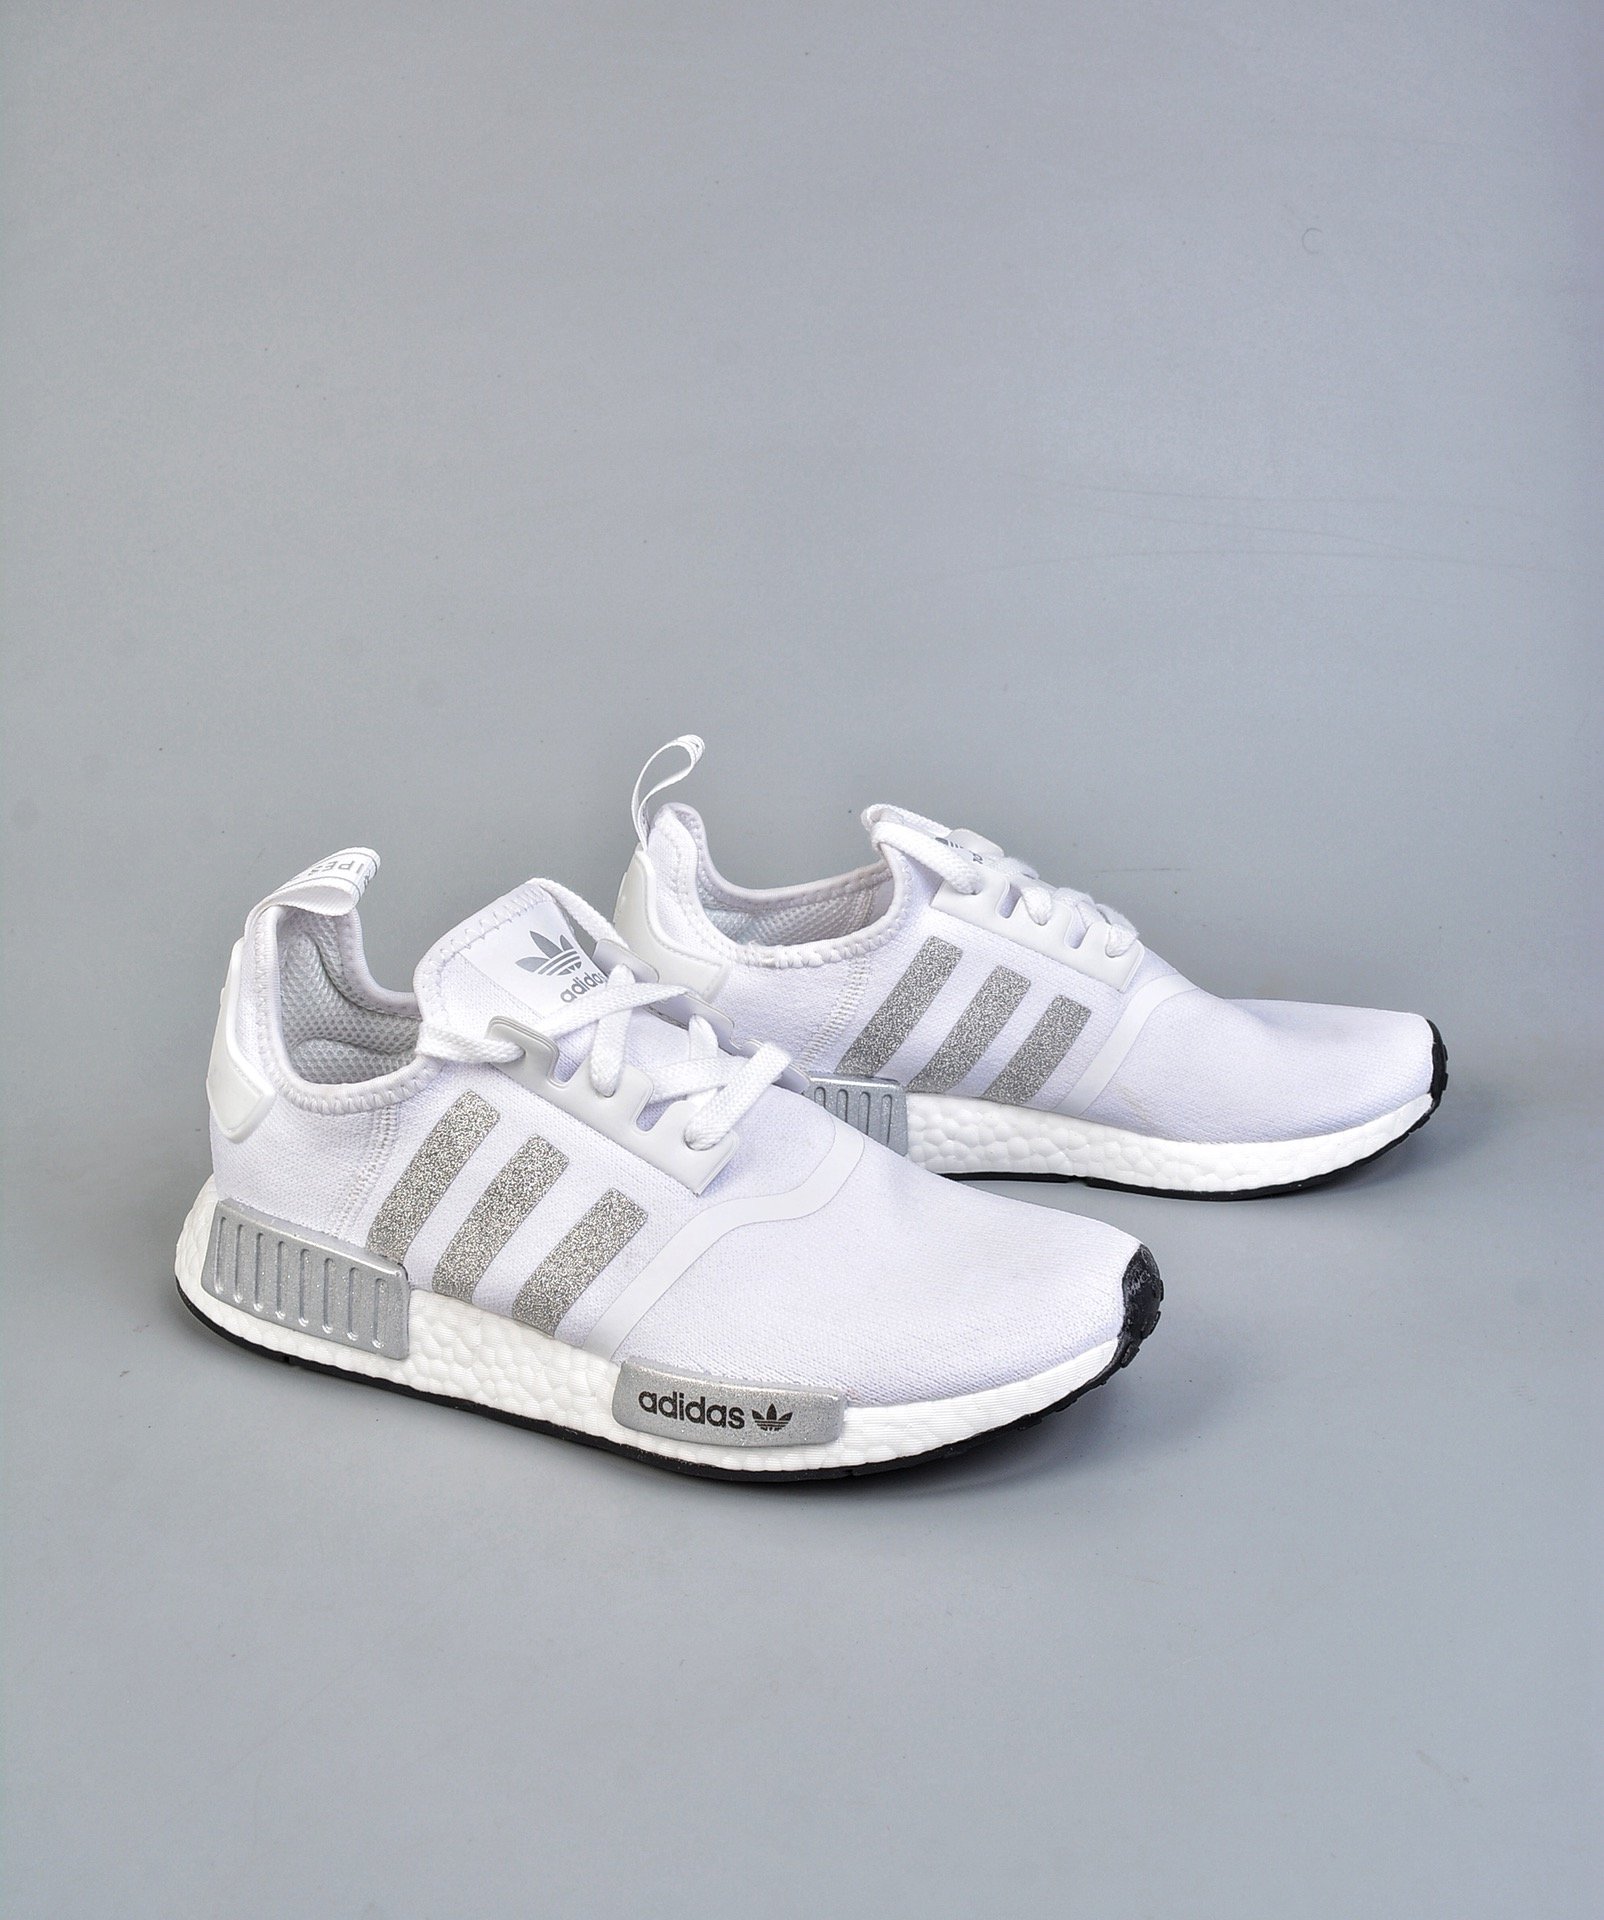 nmd r1 athletic shoe women's